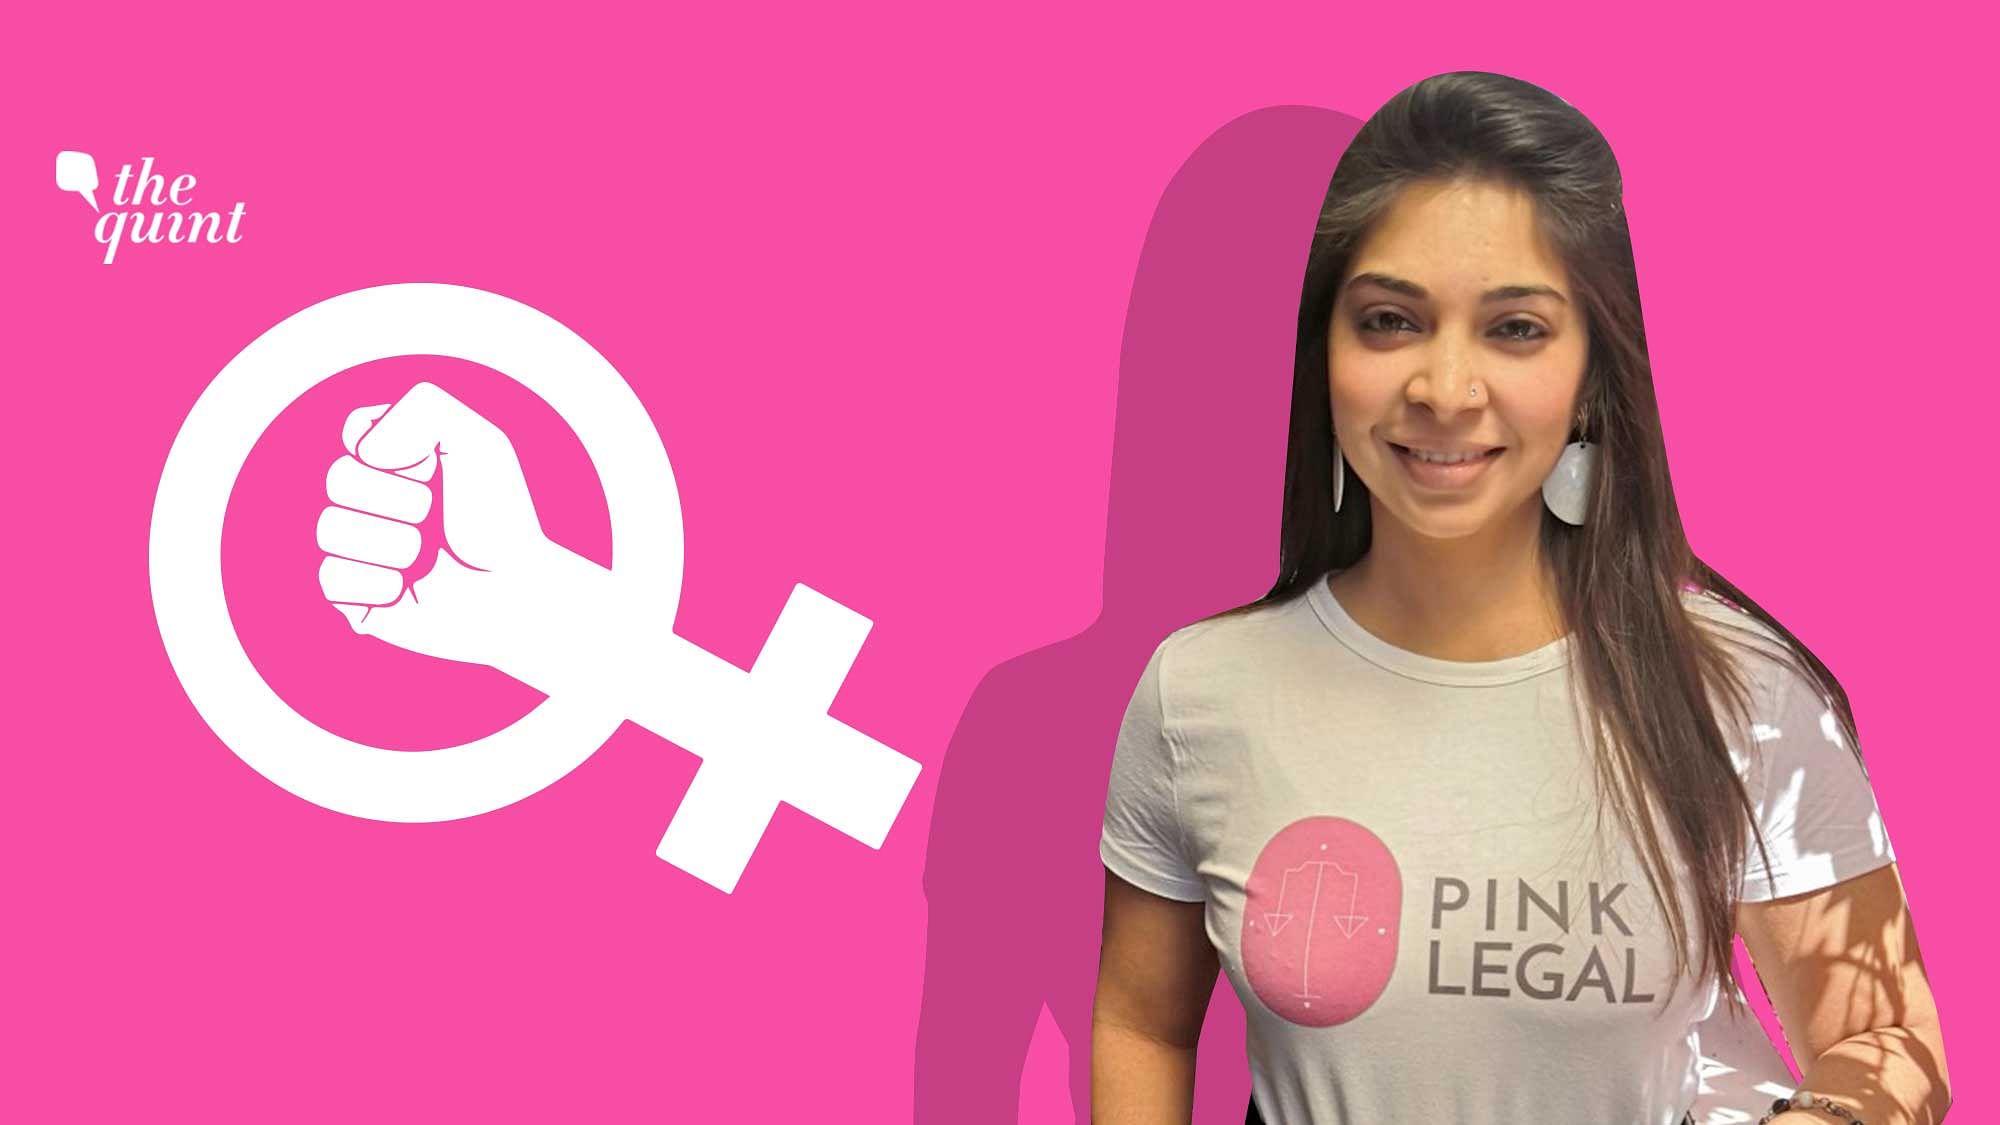 Manasi Chaudhari’s ‘Pink Legal’ is India’s first platform focused on women’s rights and laws.